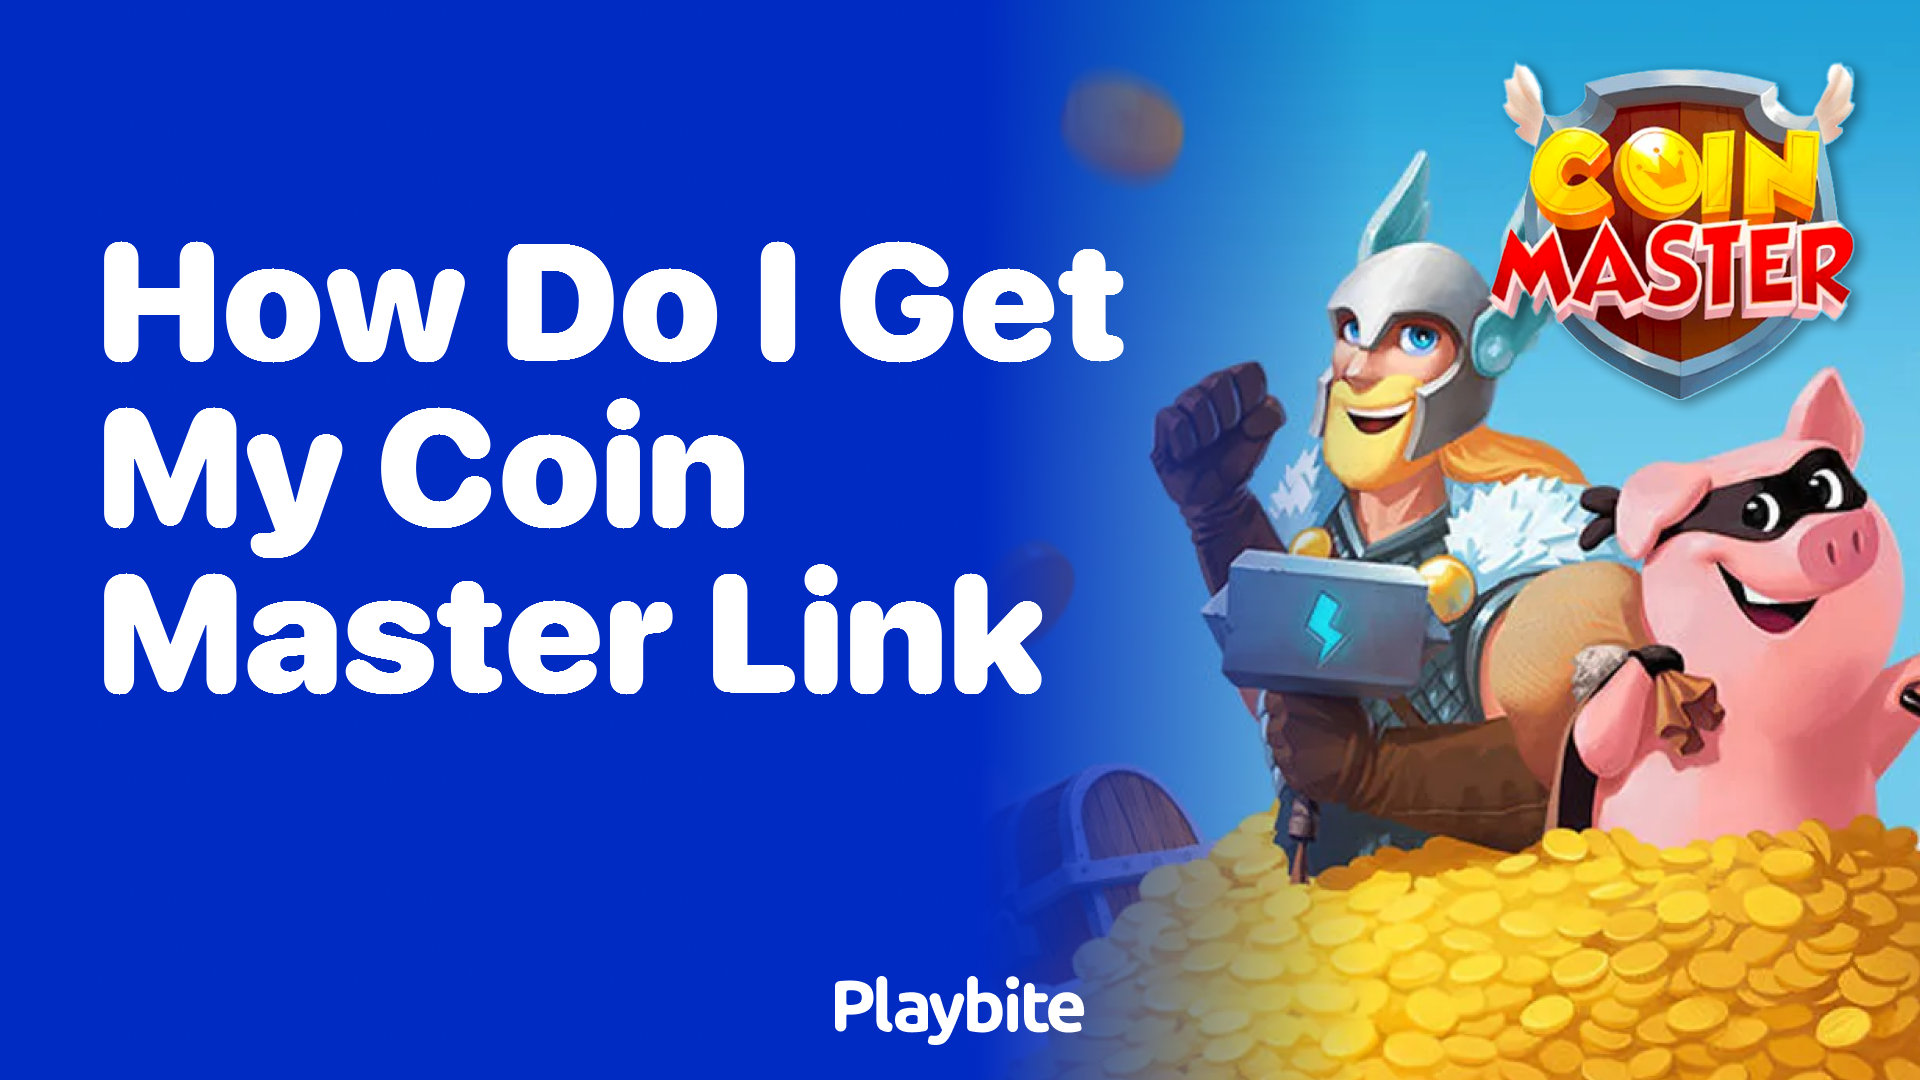 Coin Master Free Spins & Coins Generator | Coin master hack, Coins, Free cards